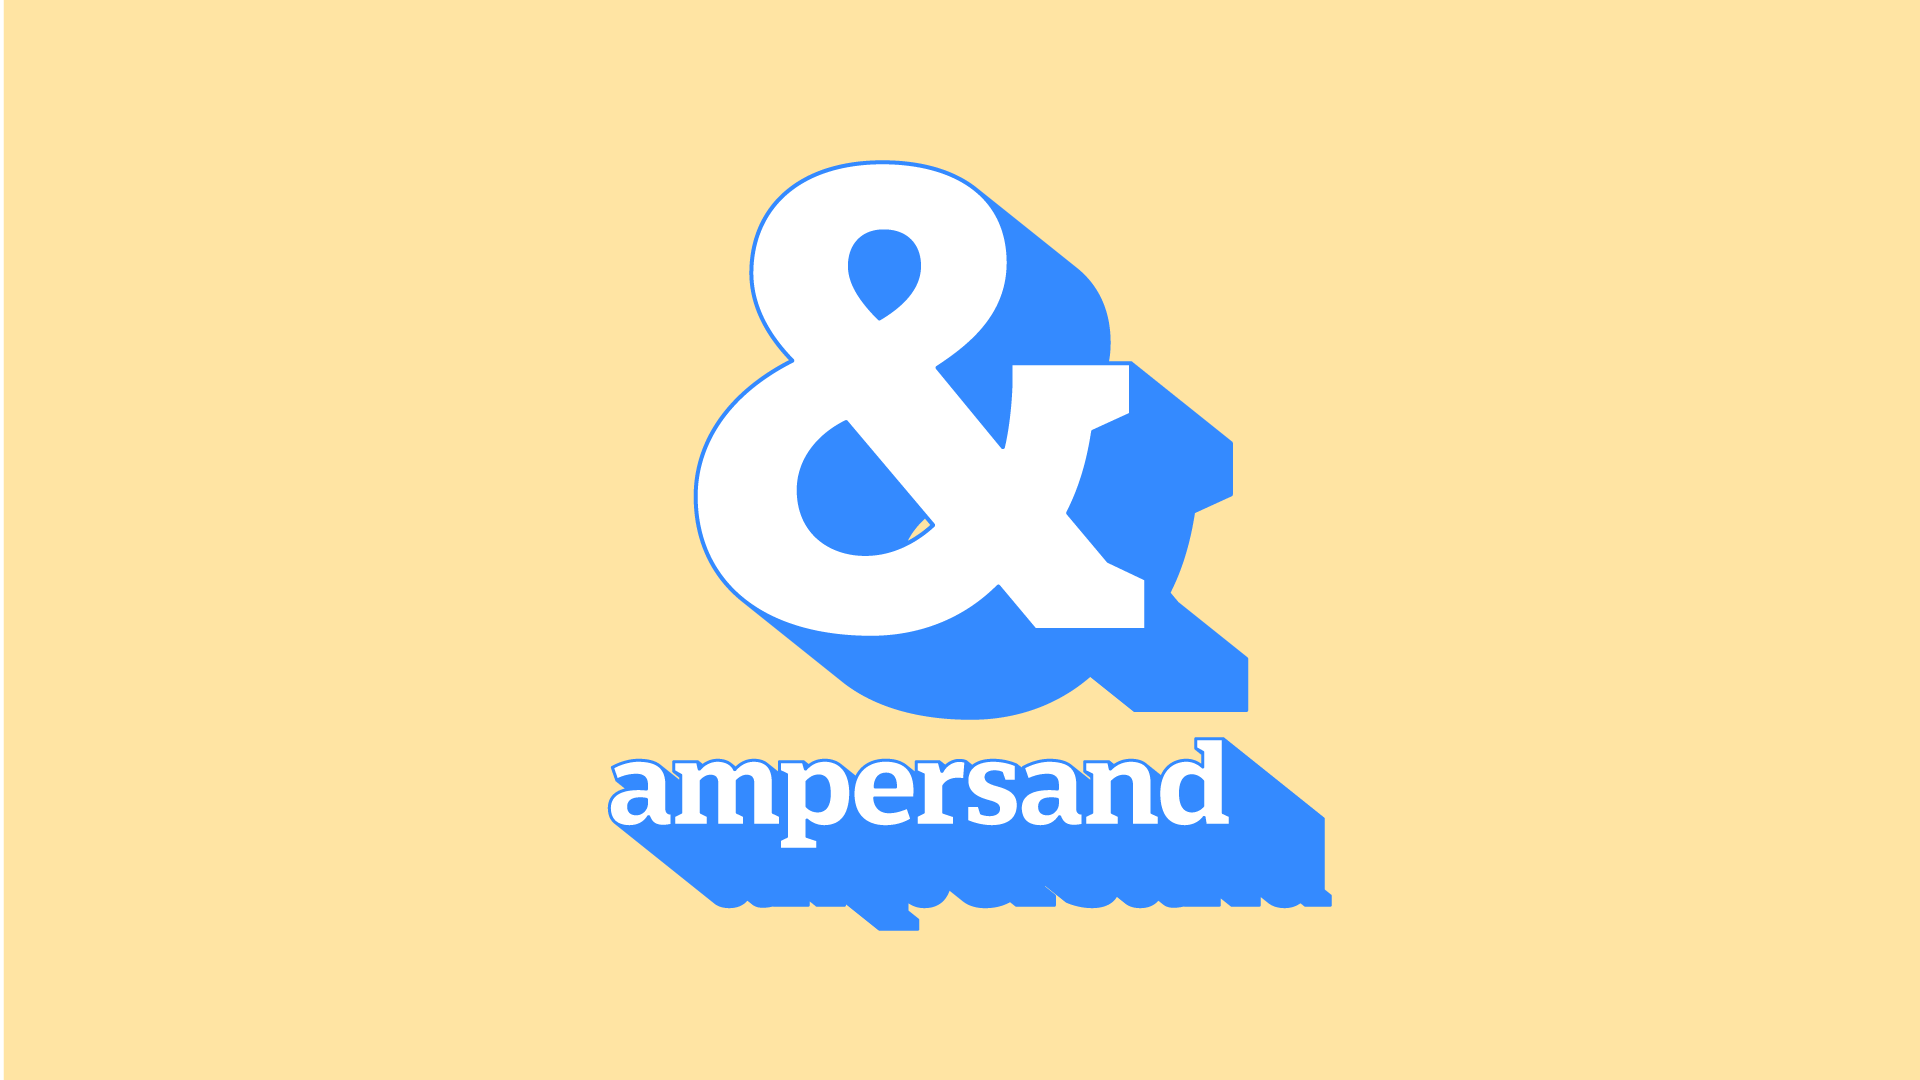 Do You Love The Ampersand? Here's Exactly How To Use It.